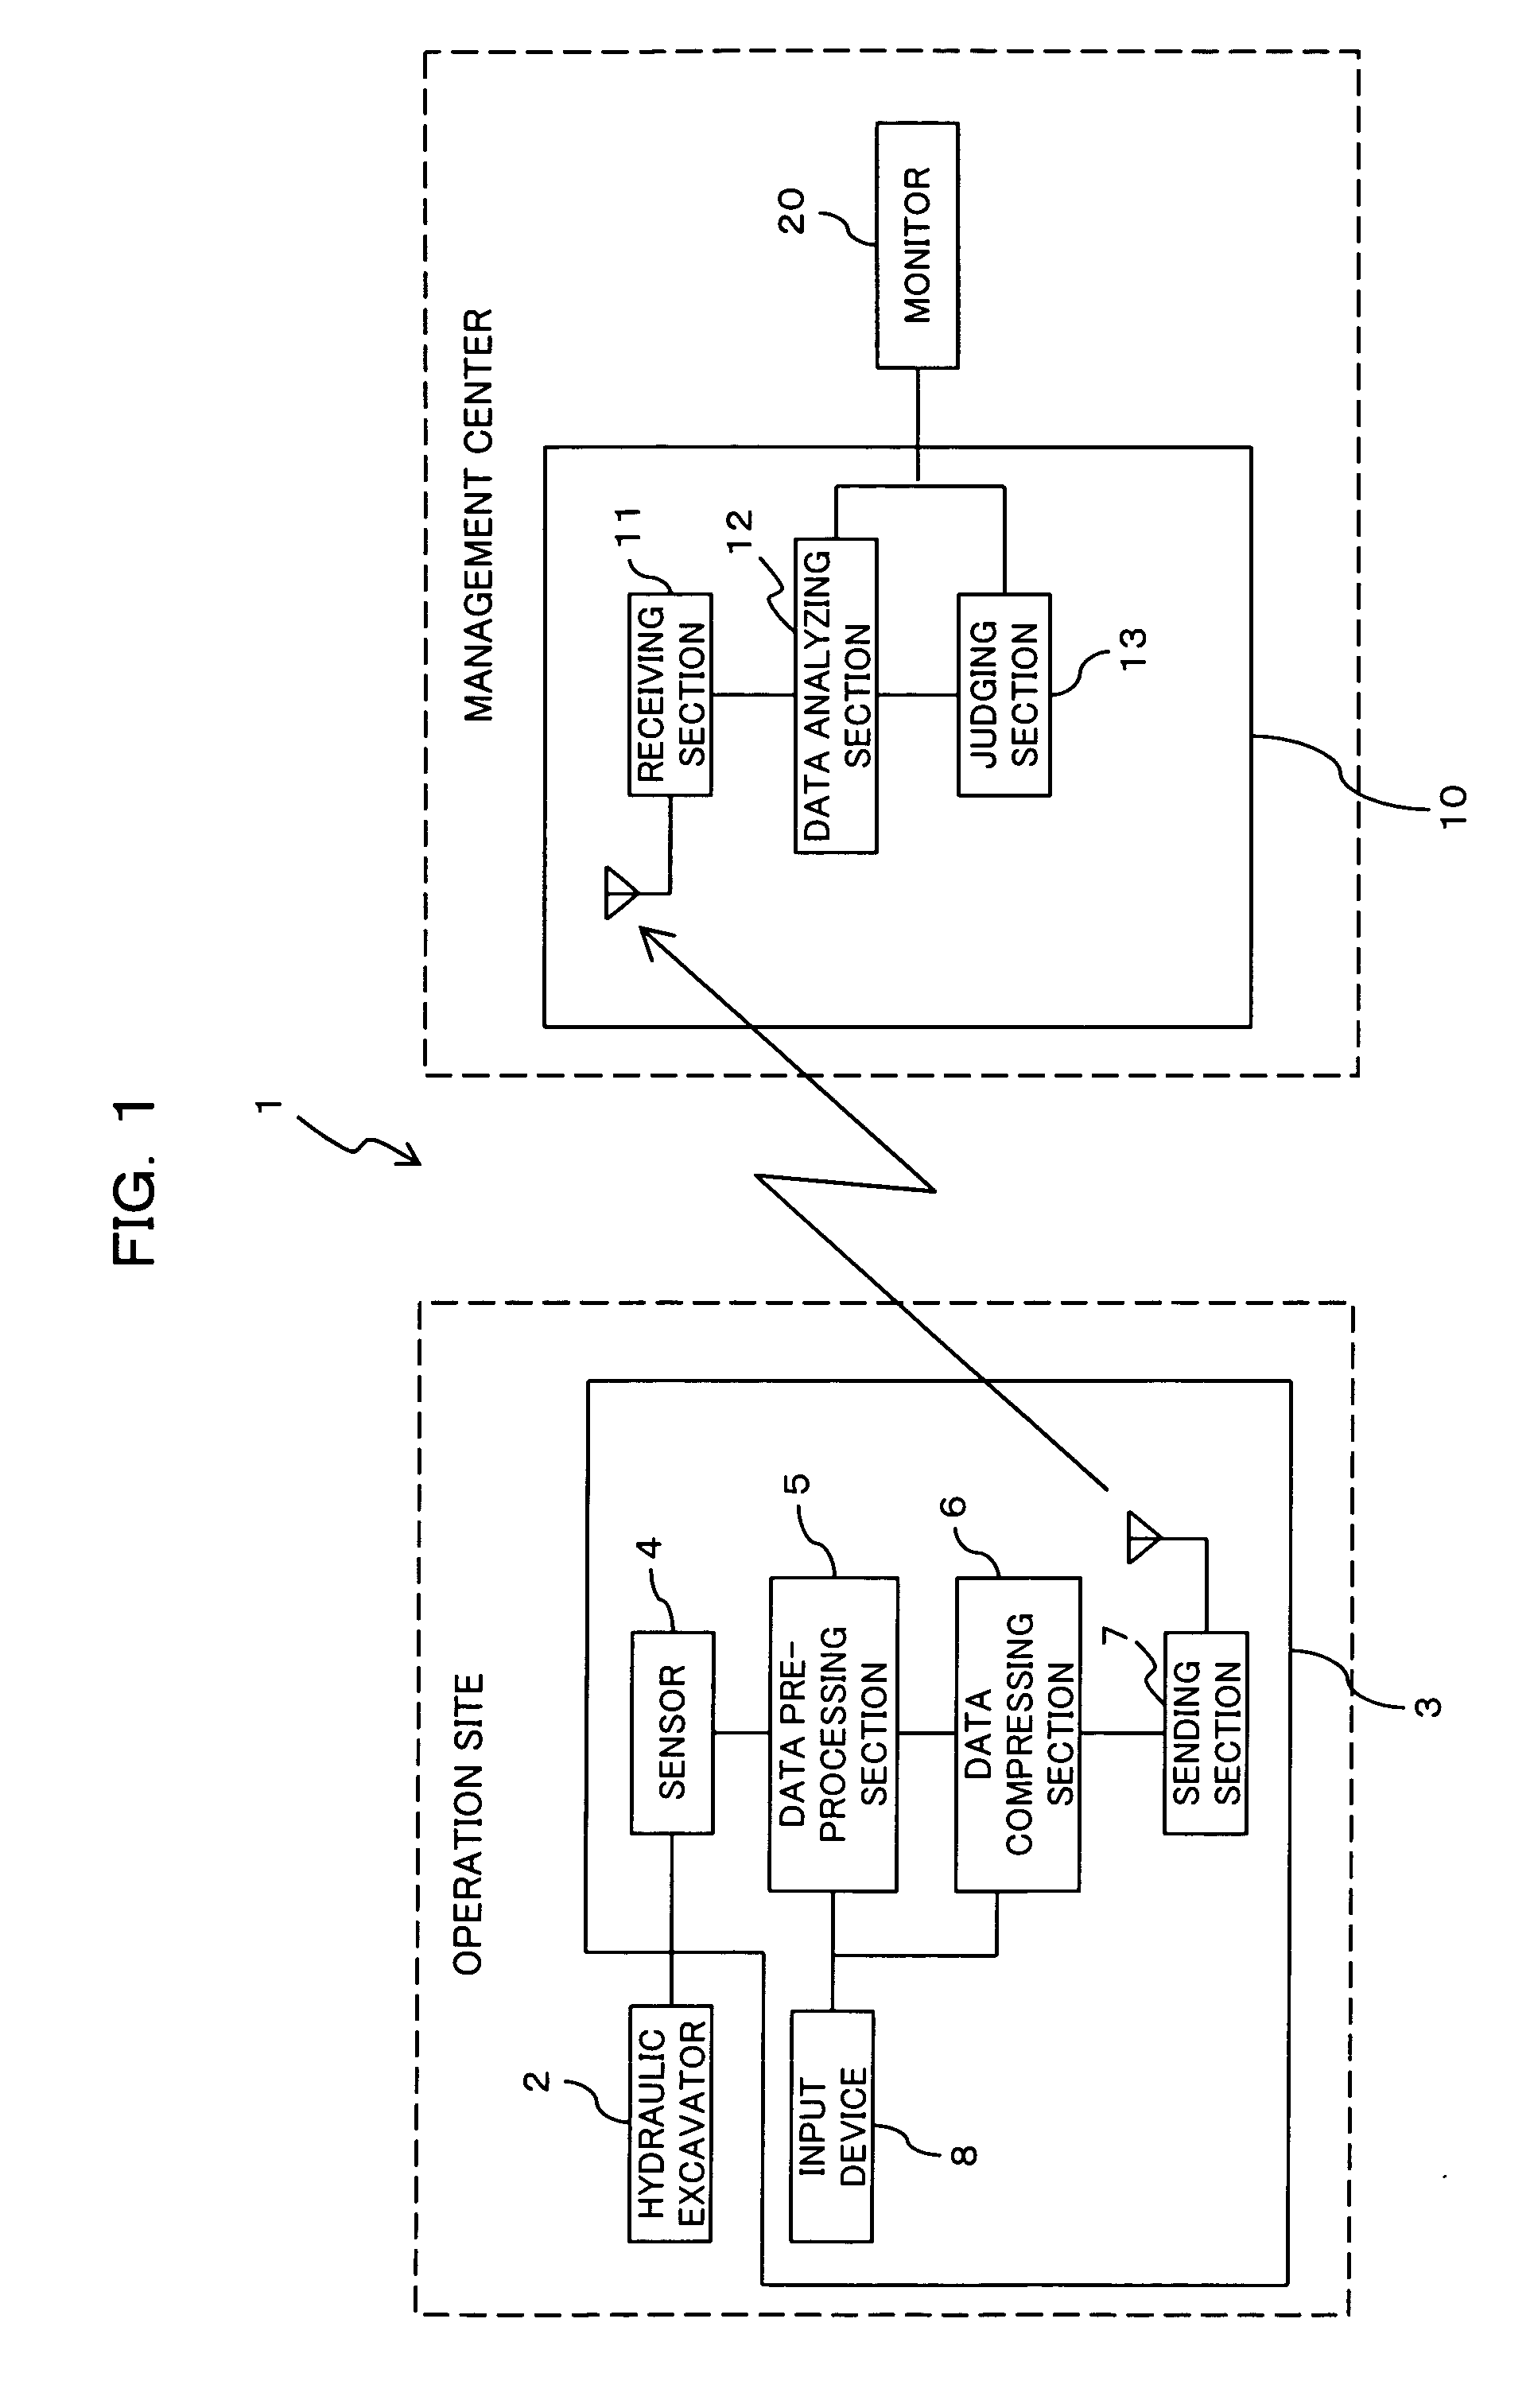 Apparatus and Method for Compressing Data, Apparatus and Method for Analyzing Data, and Data Management System